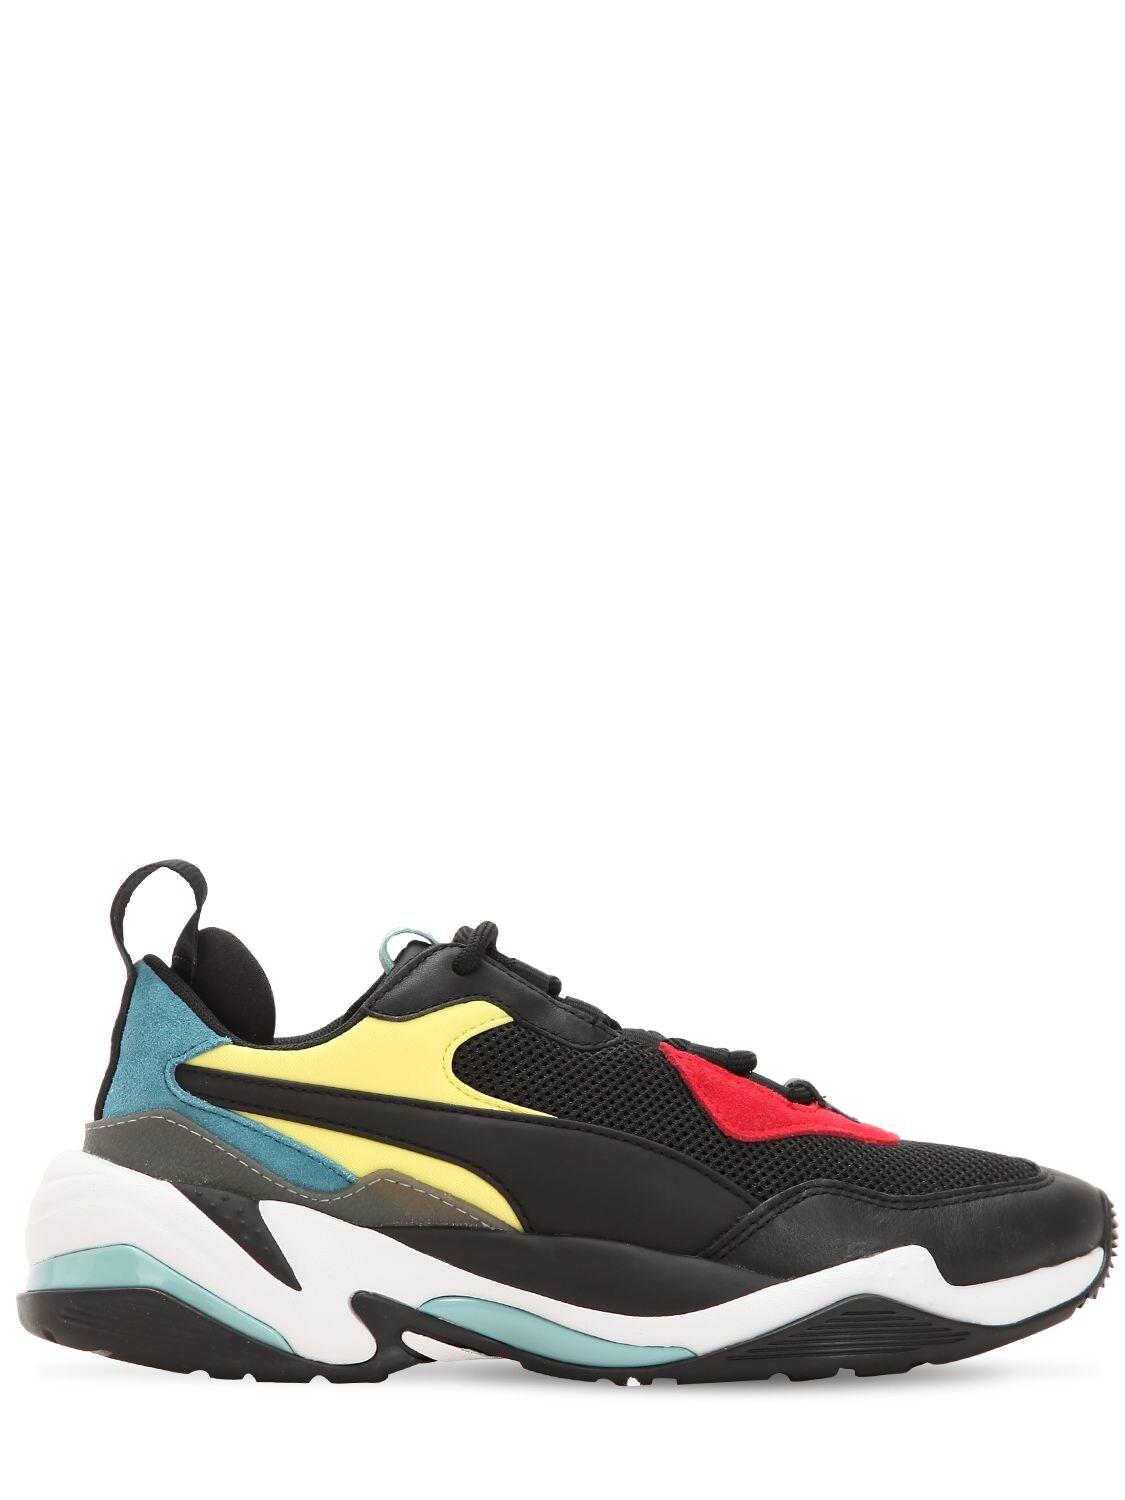 Puma Thunder Spectra Leather & Mesh Sneakers In Black